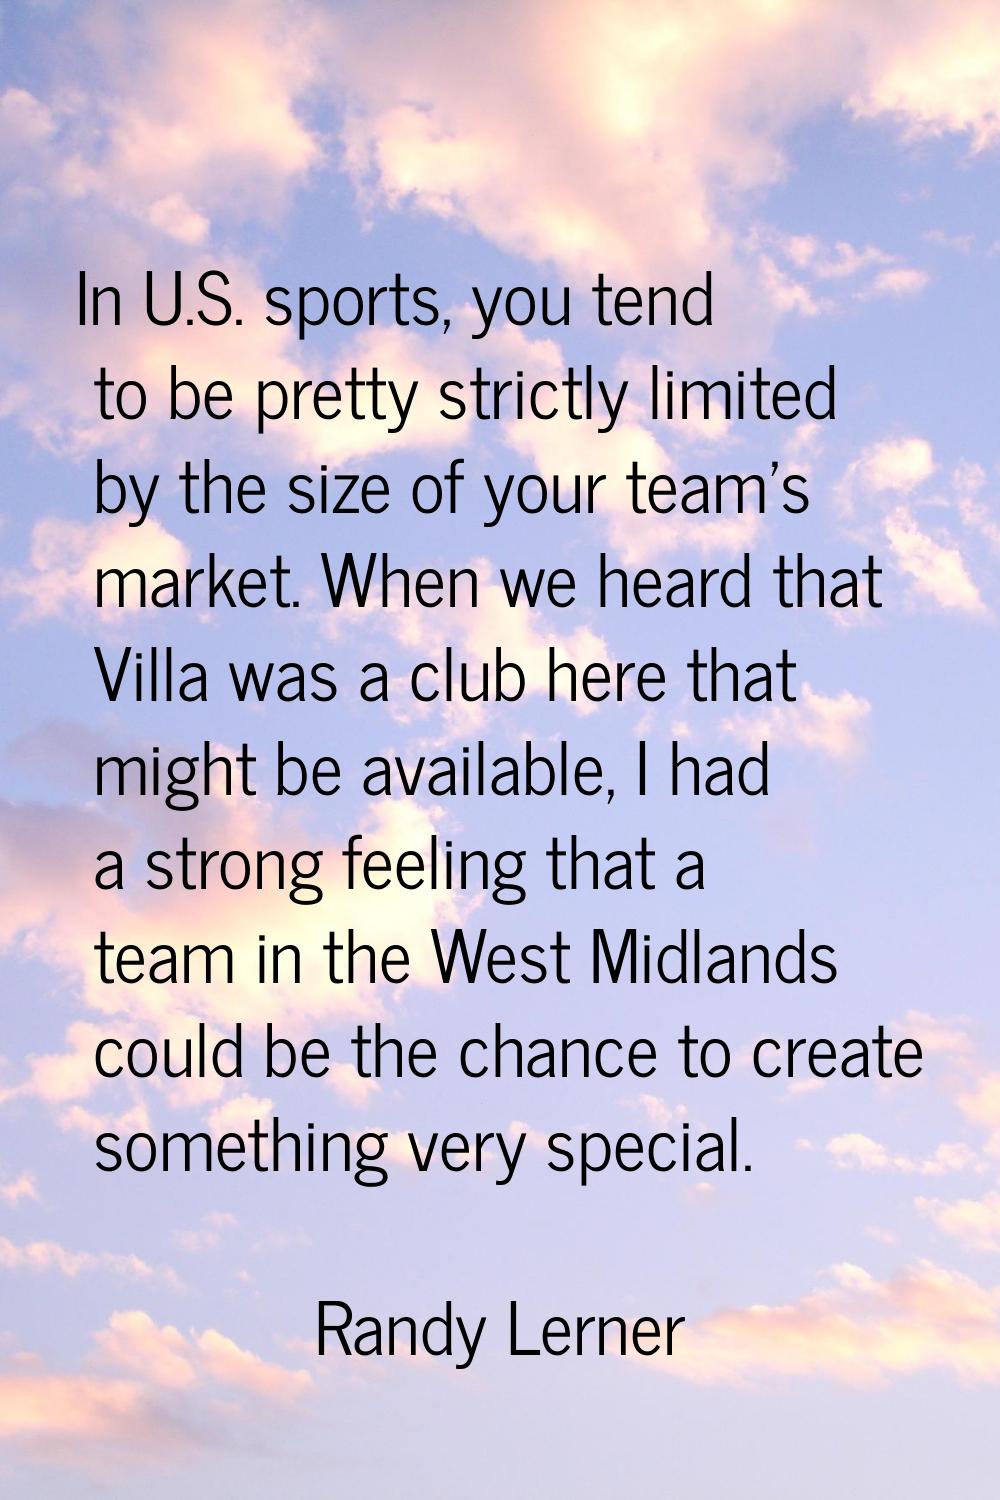 In U.S. sports, you tend to be pretty strictly limited by the size of your team's market. When we h